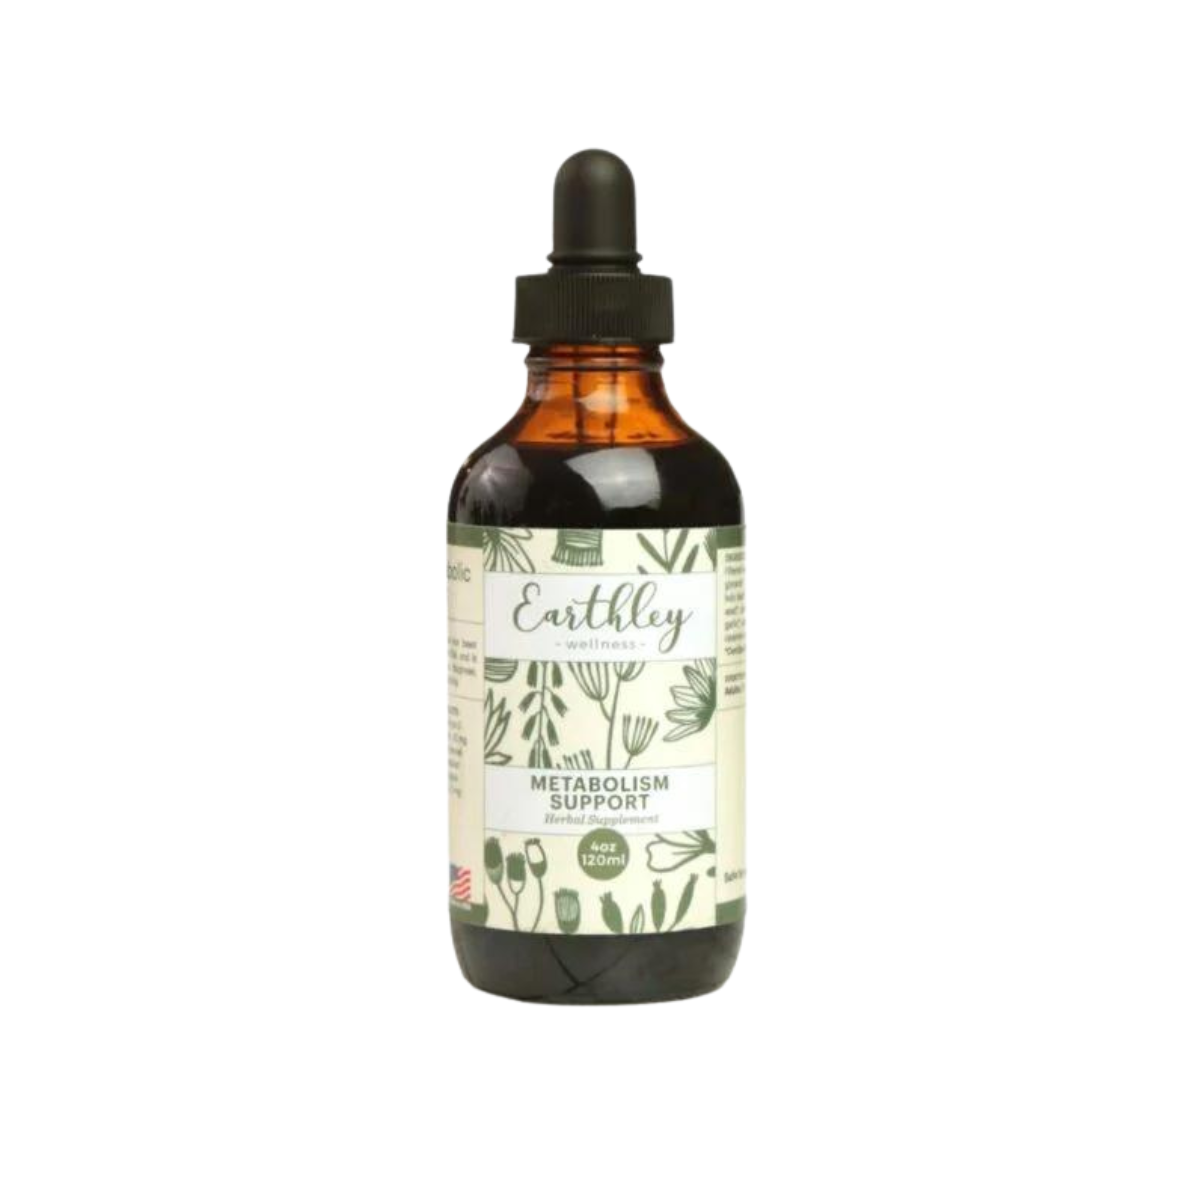 Earthley Metabolism Support Tincture